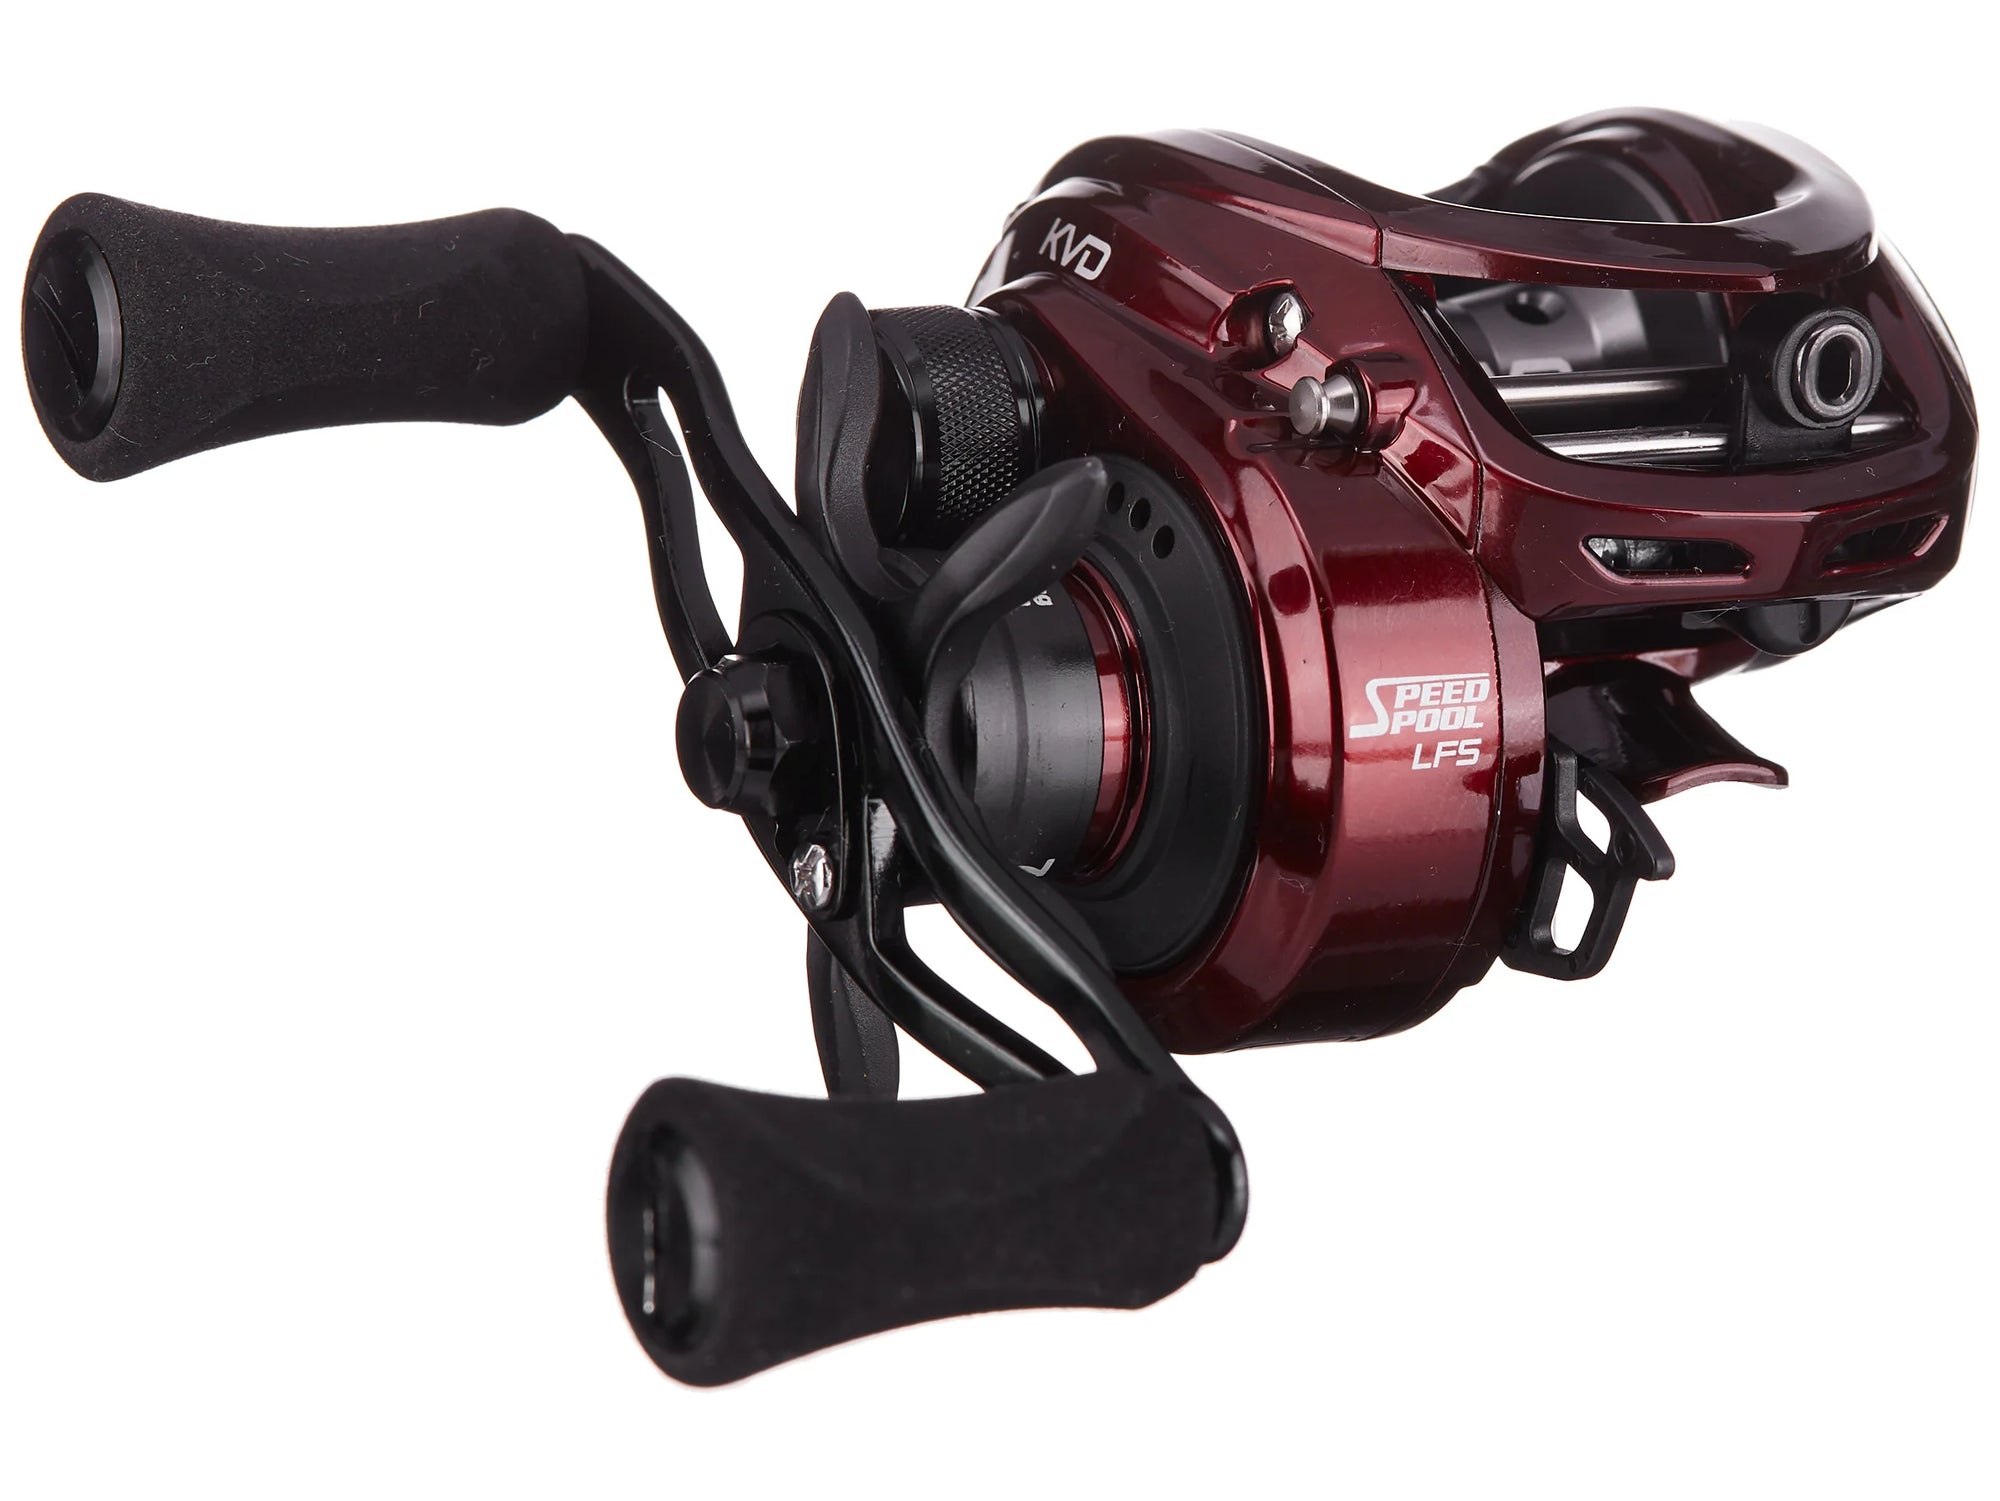 dmk baitcasting reel, dmk baitcasting reel Suppliers and